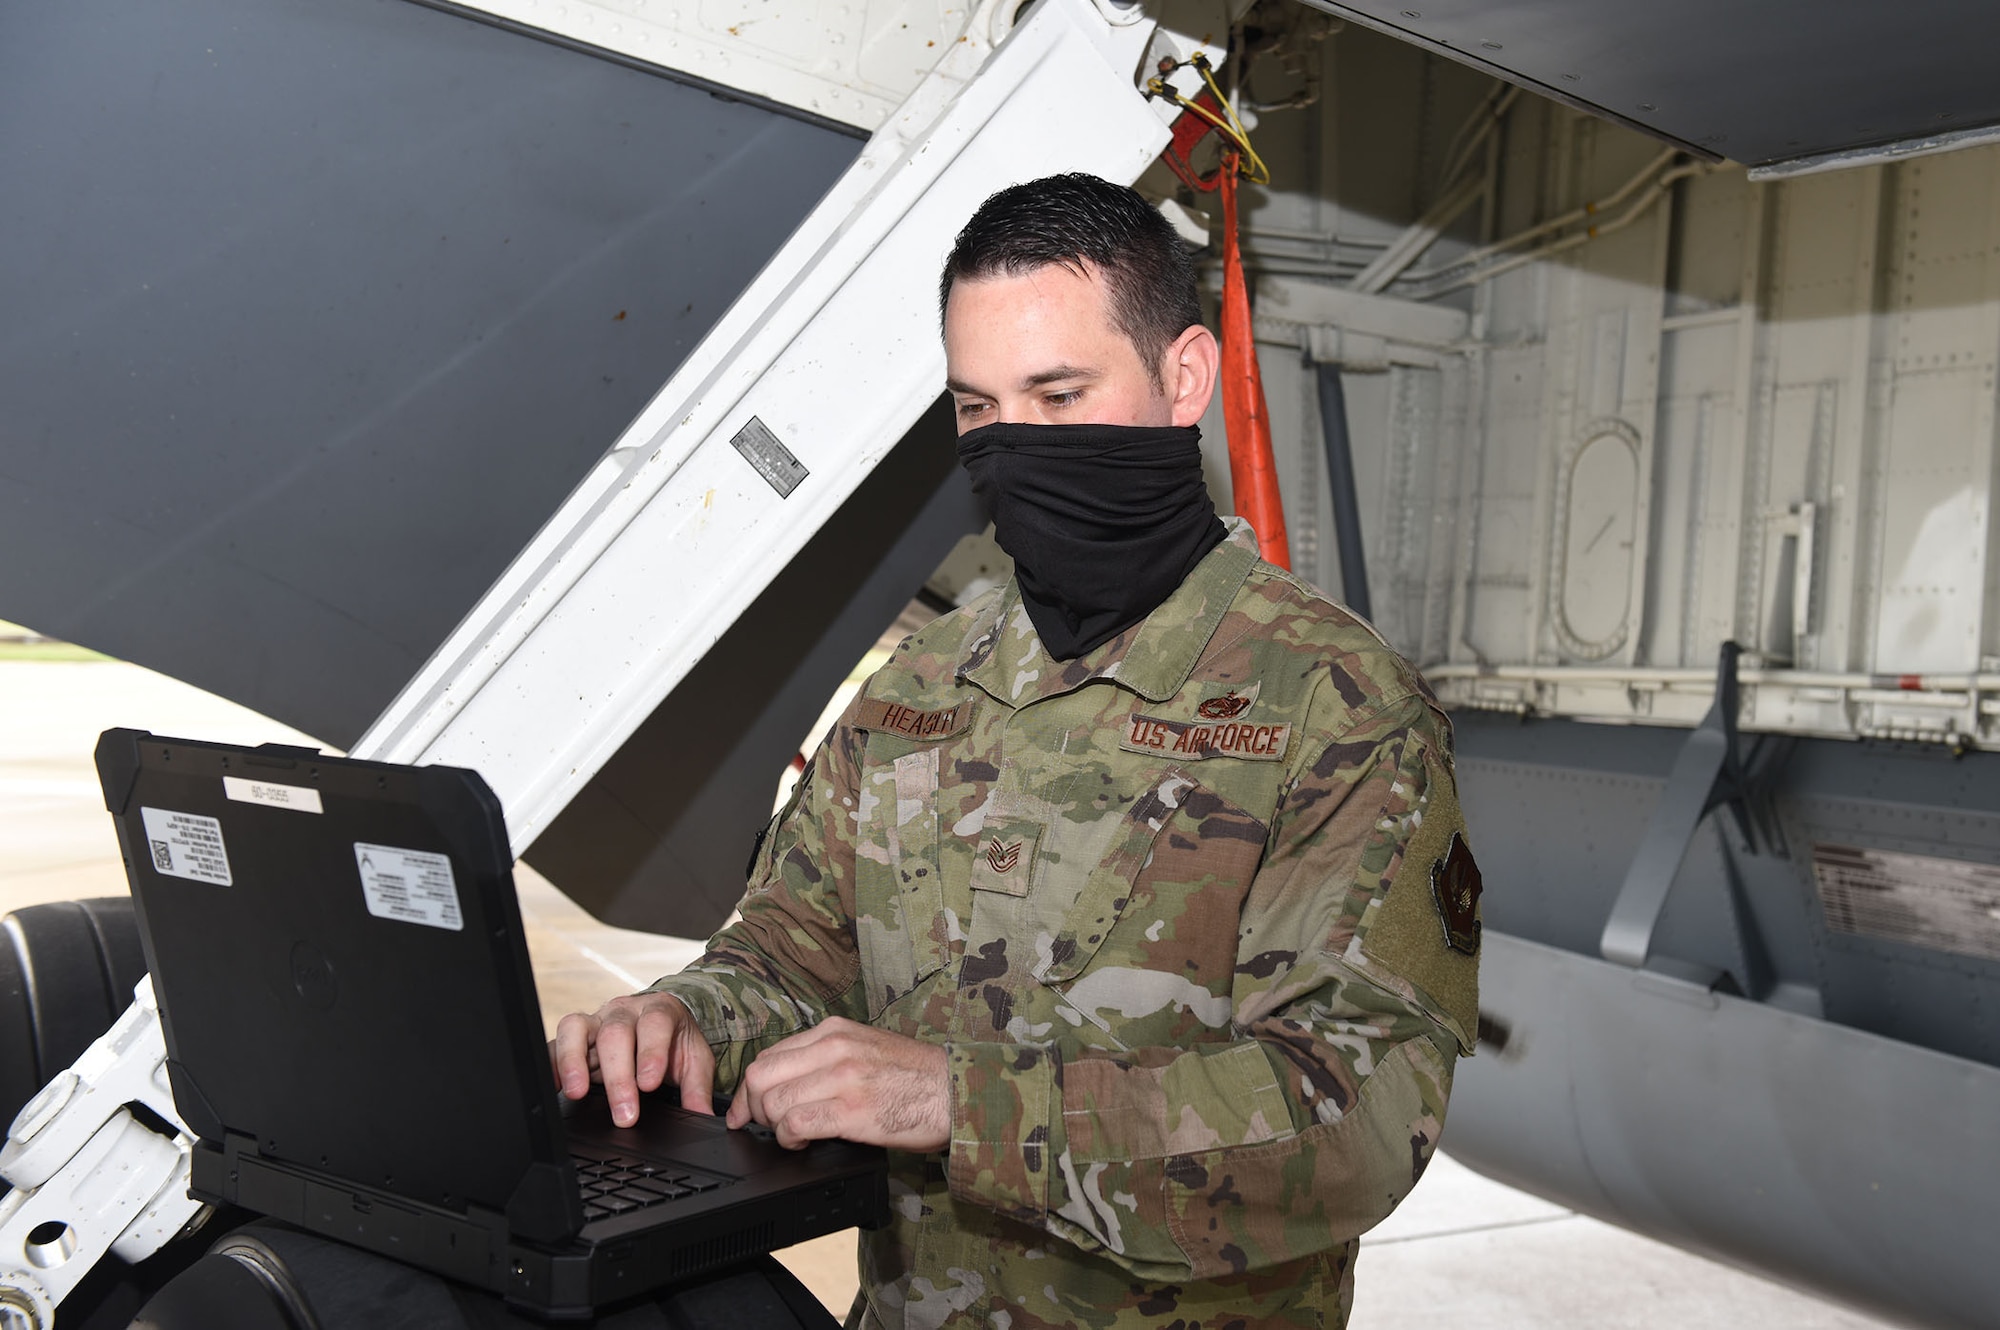 Tech Sgt. Michael Heasley, 100th Aircraft Maintenance Squadron flying crew chief manager, updates the 100th Maintenance Group’s virtual forms program after conducting checks on a KC-135 Stratotanker aircraft at Royal Air Force Mildenhall, England, Sept. 3, 2020. The 100th MXG recently became the first legacy unit in the Air Force to transition full virtual forms for its aircraft, removing the need for paper binders and saving dollars and resources. (U.S. Air Force photo by Karen Abeyasekere)